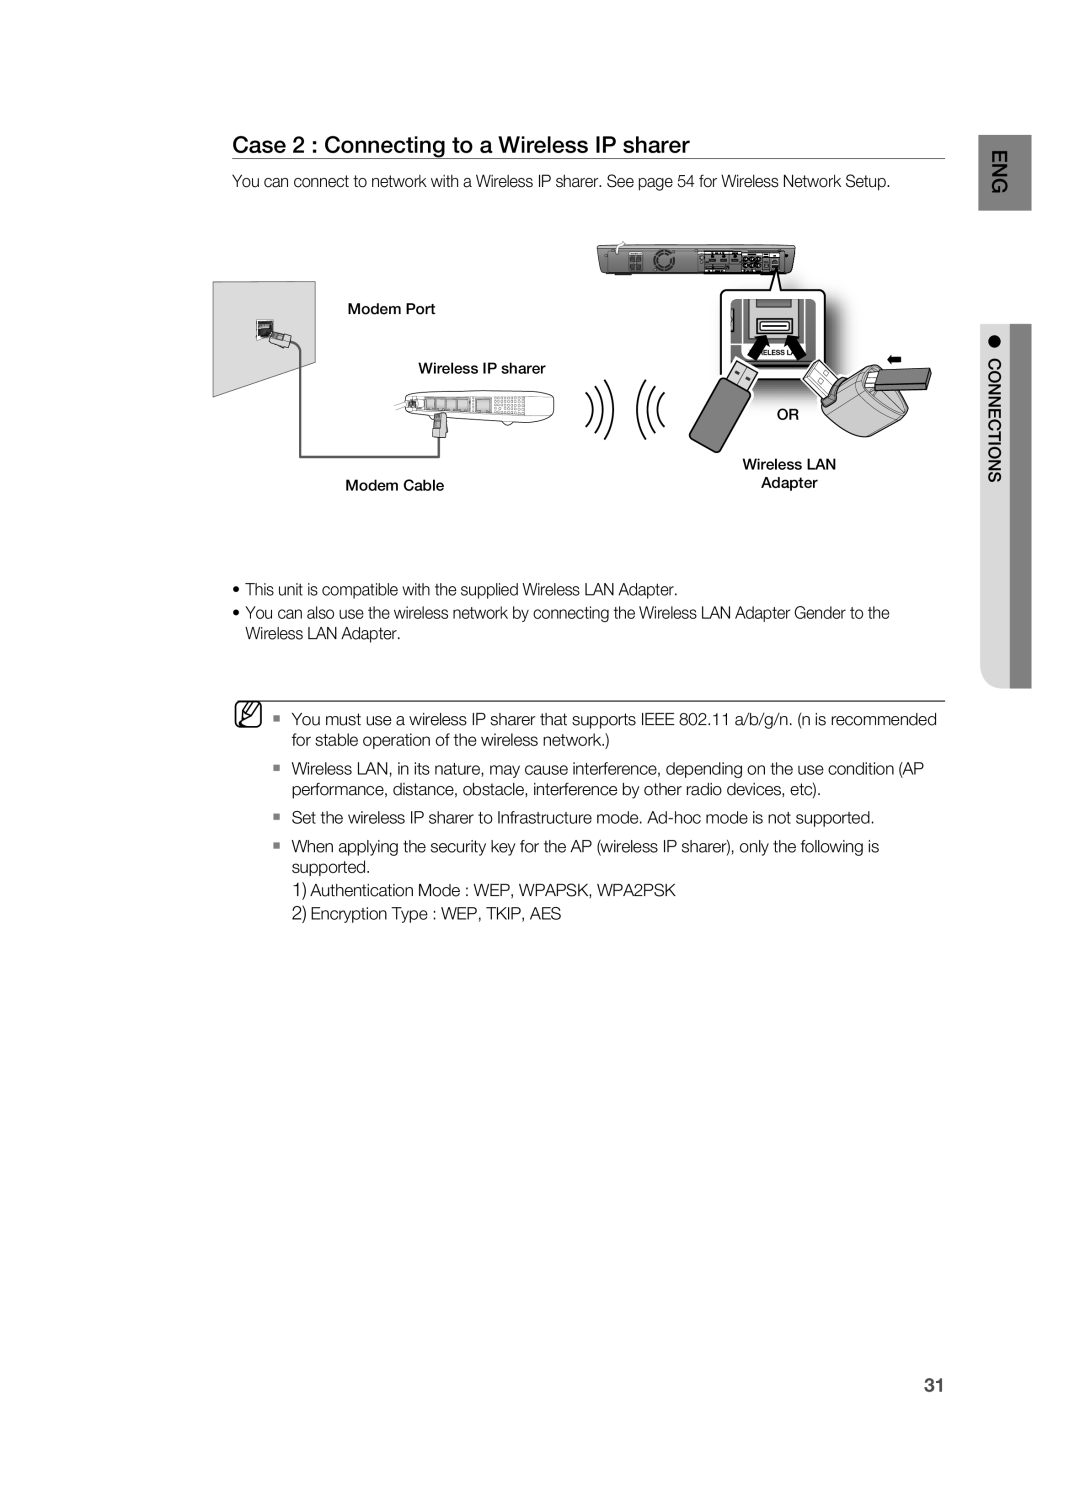 Samsung HT-BD3252 user manual Case 2 Connecting to a Wireless IP sharer 